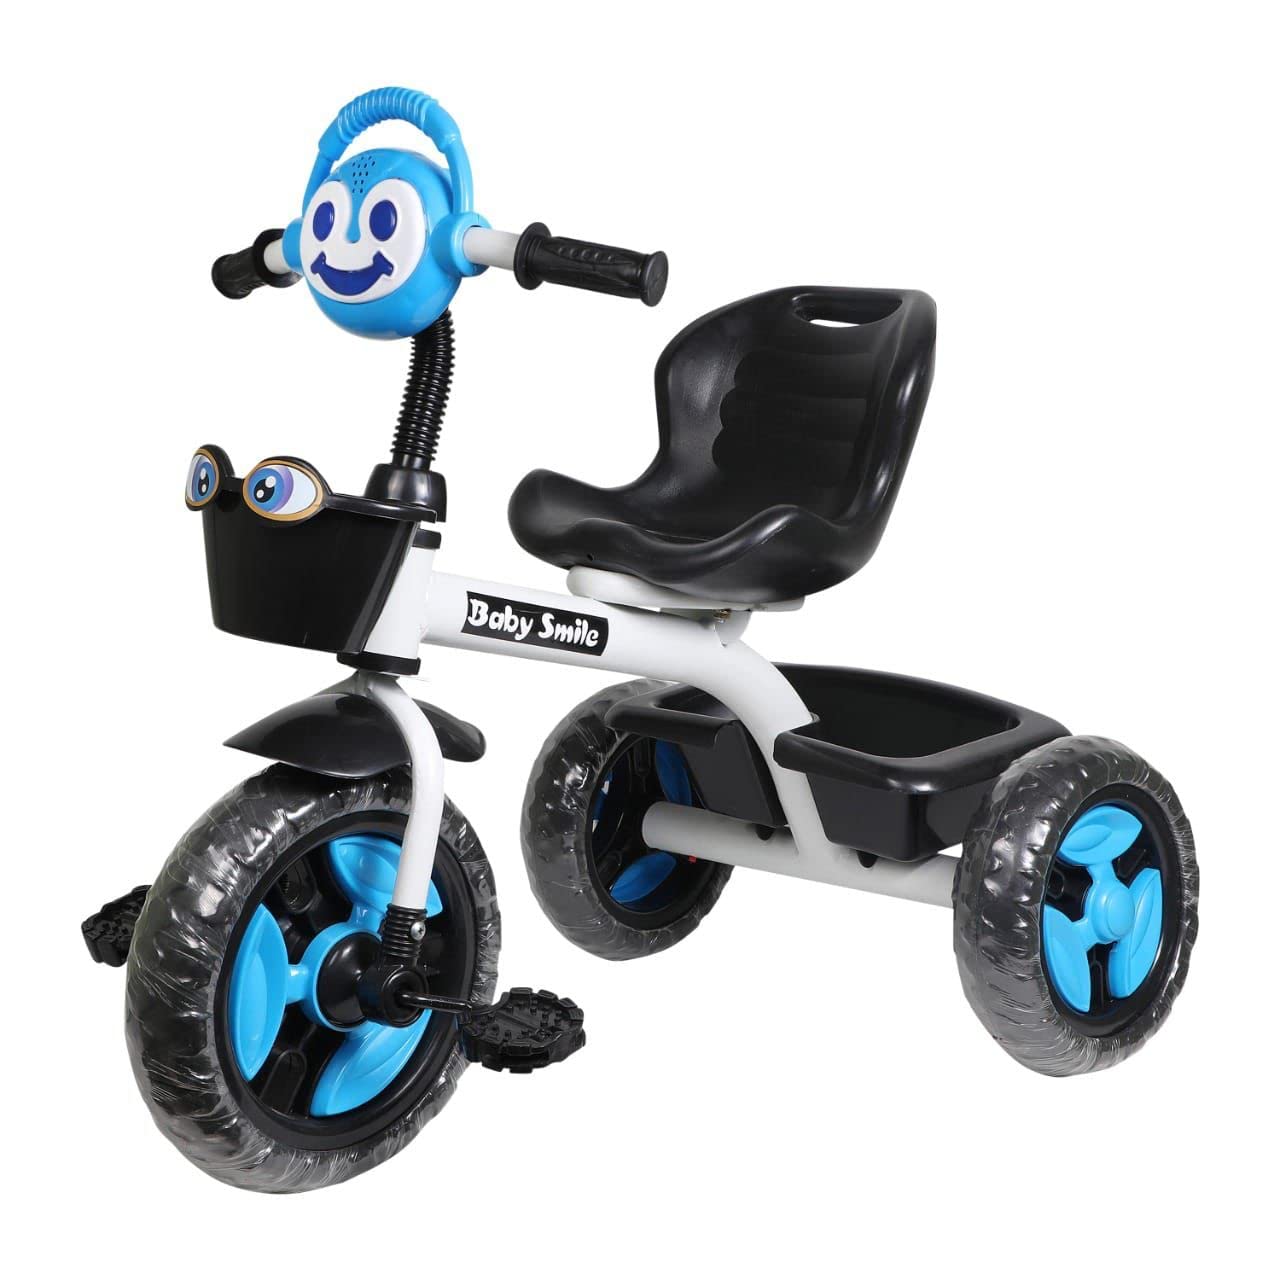 Compact and Convenient Small Tricycles for Easy Mobility